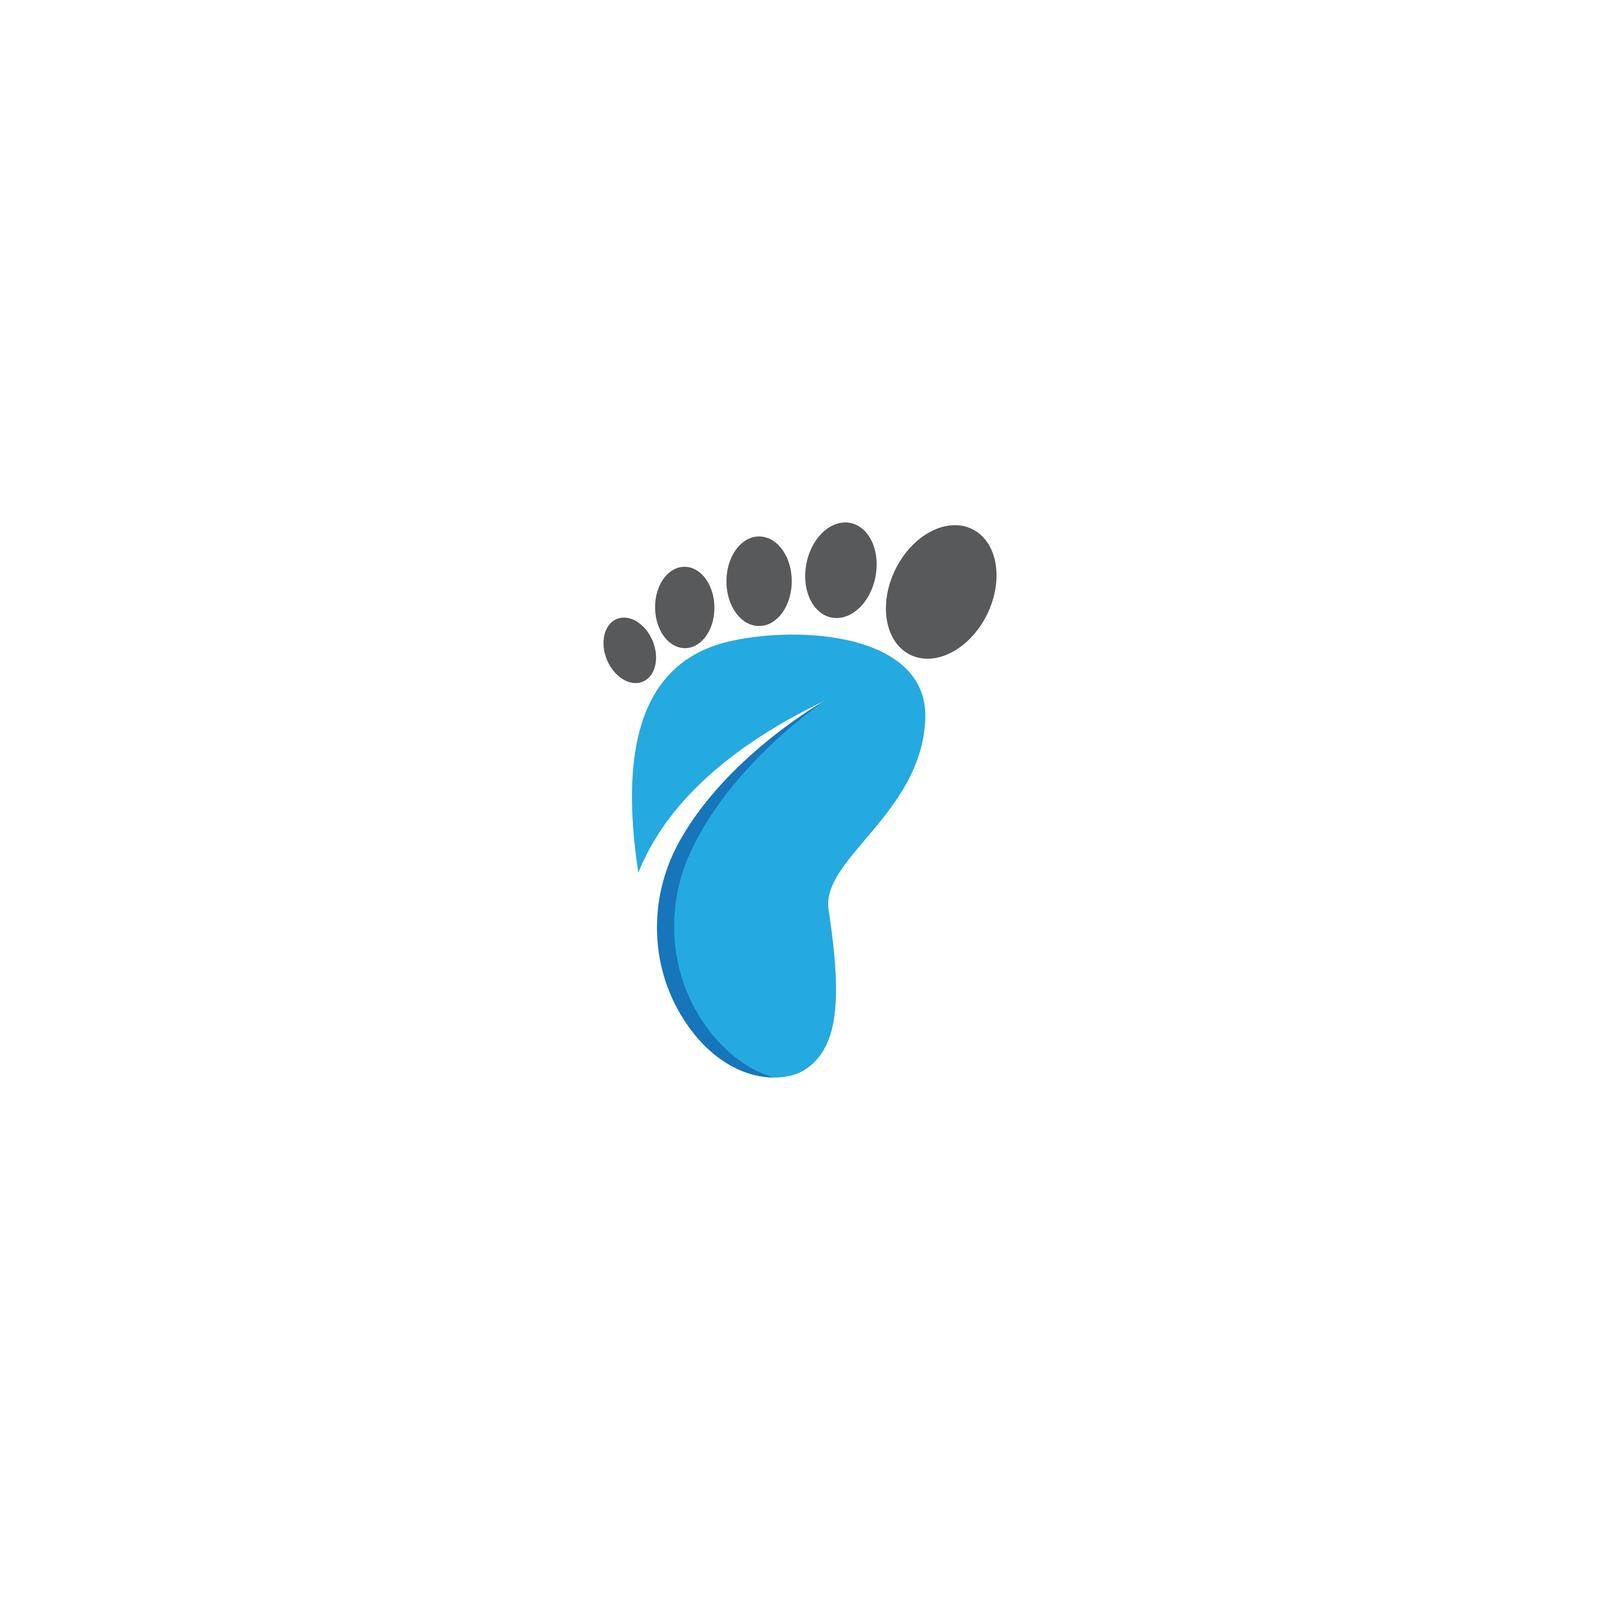 Foot therapist logo vector icon by Attades19